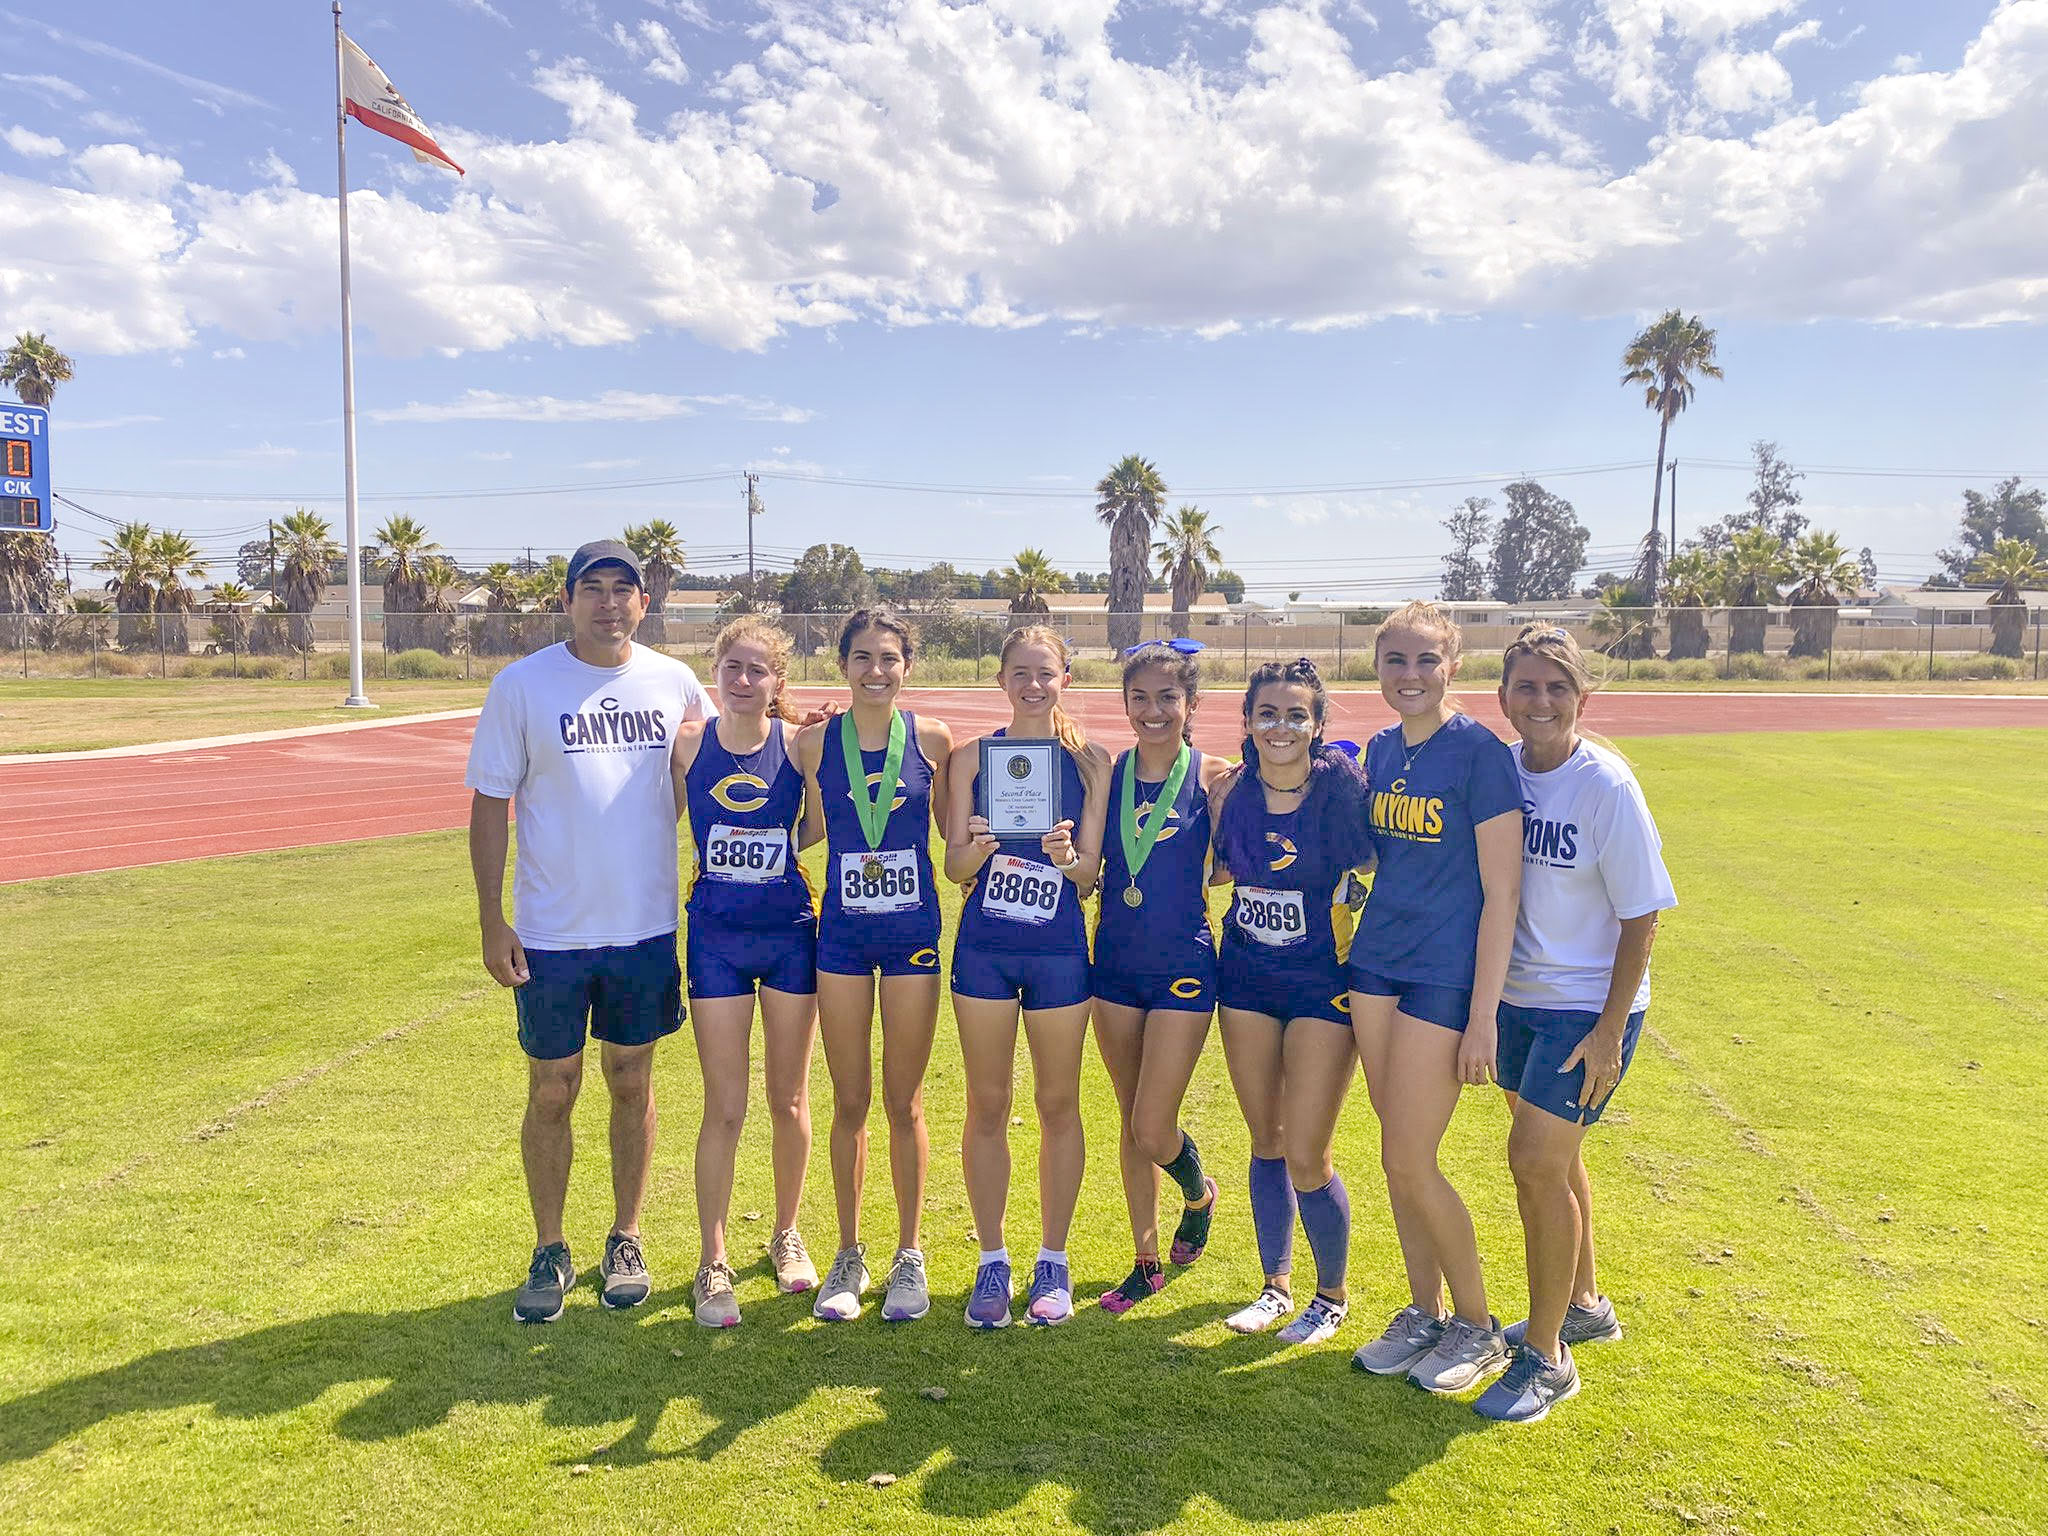 College of the Canyons freshman Danielle Salcedo took first in the individual standings and the Cougars placed second in team results at the Oxnard College Invitational on Friday, Sept. 10, 2021.